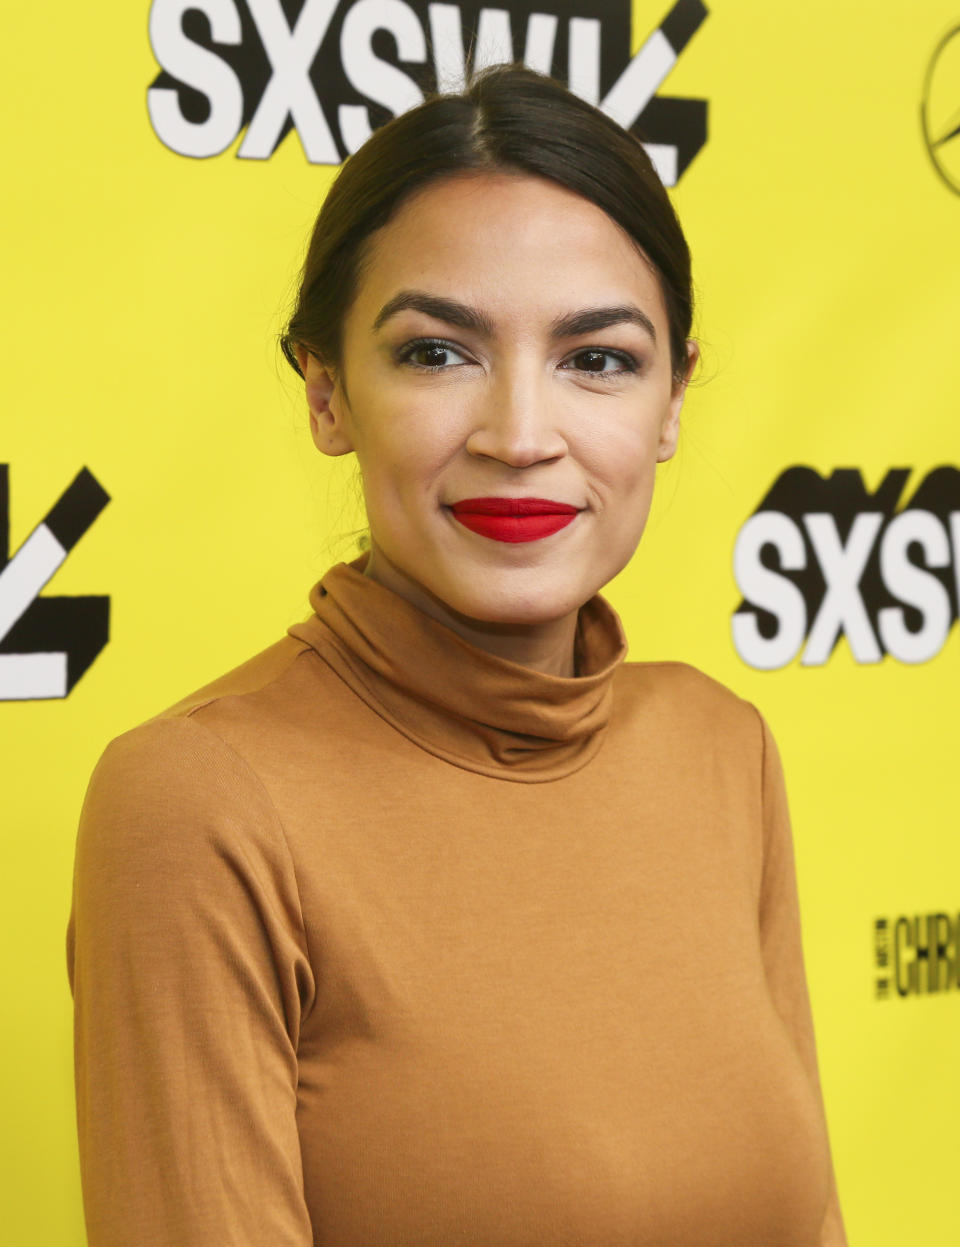 Alexandria Ocasio-Cortez arrives for the world premiere of "Knock Down the House" at the Paramount Theatre during the South by Southwest Film Festival on Sunday, March 10, 2019, in Austin, Texas. (Photo by Jack Plunkett/Invision/AP)